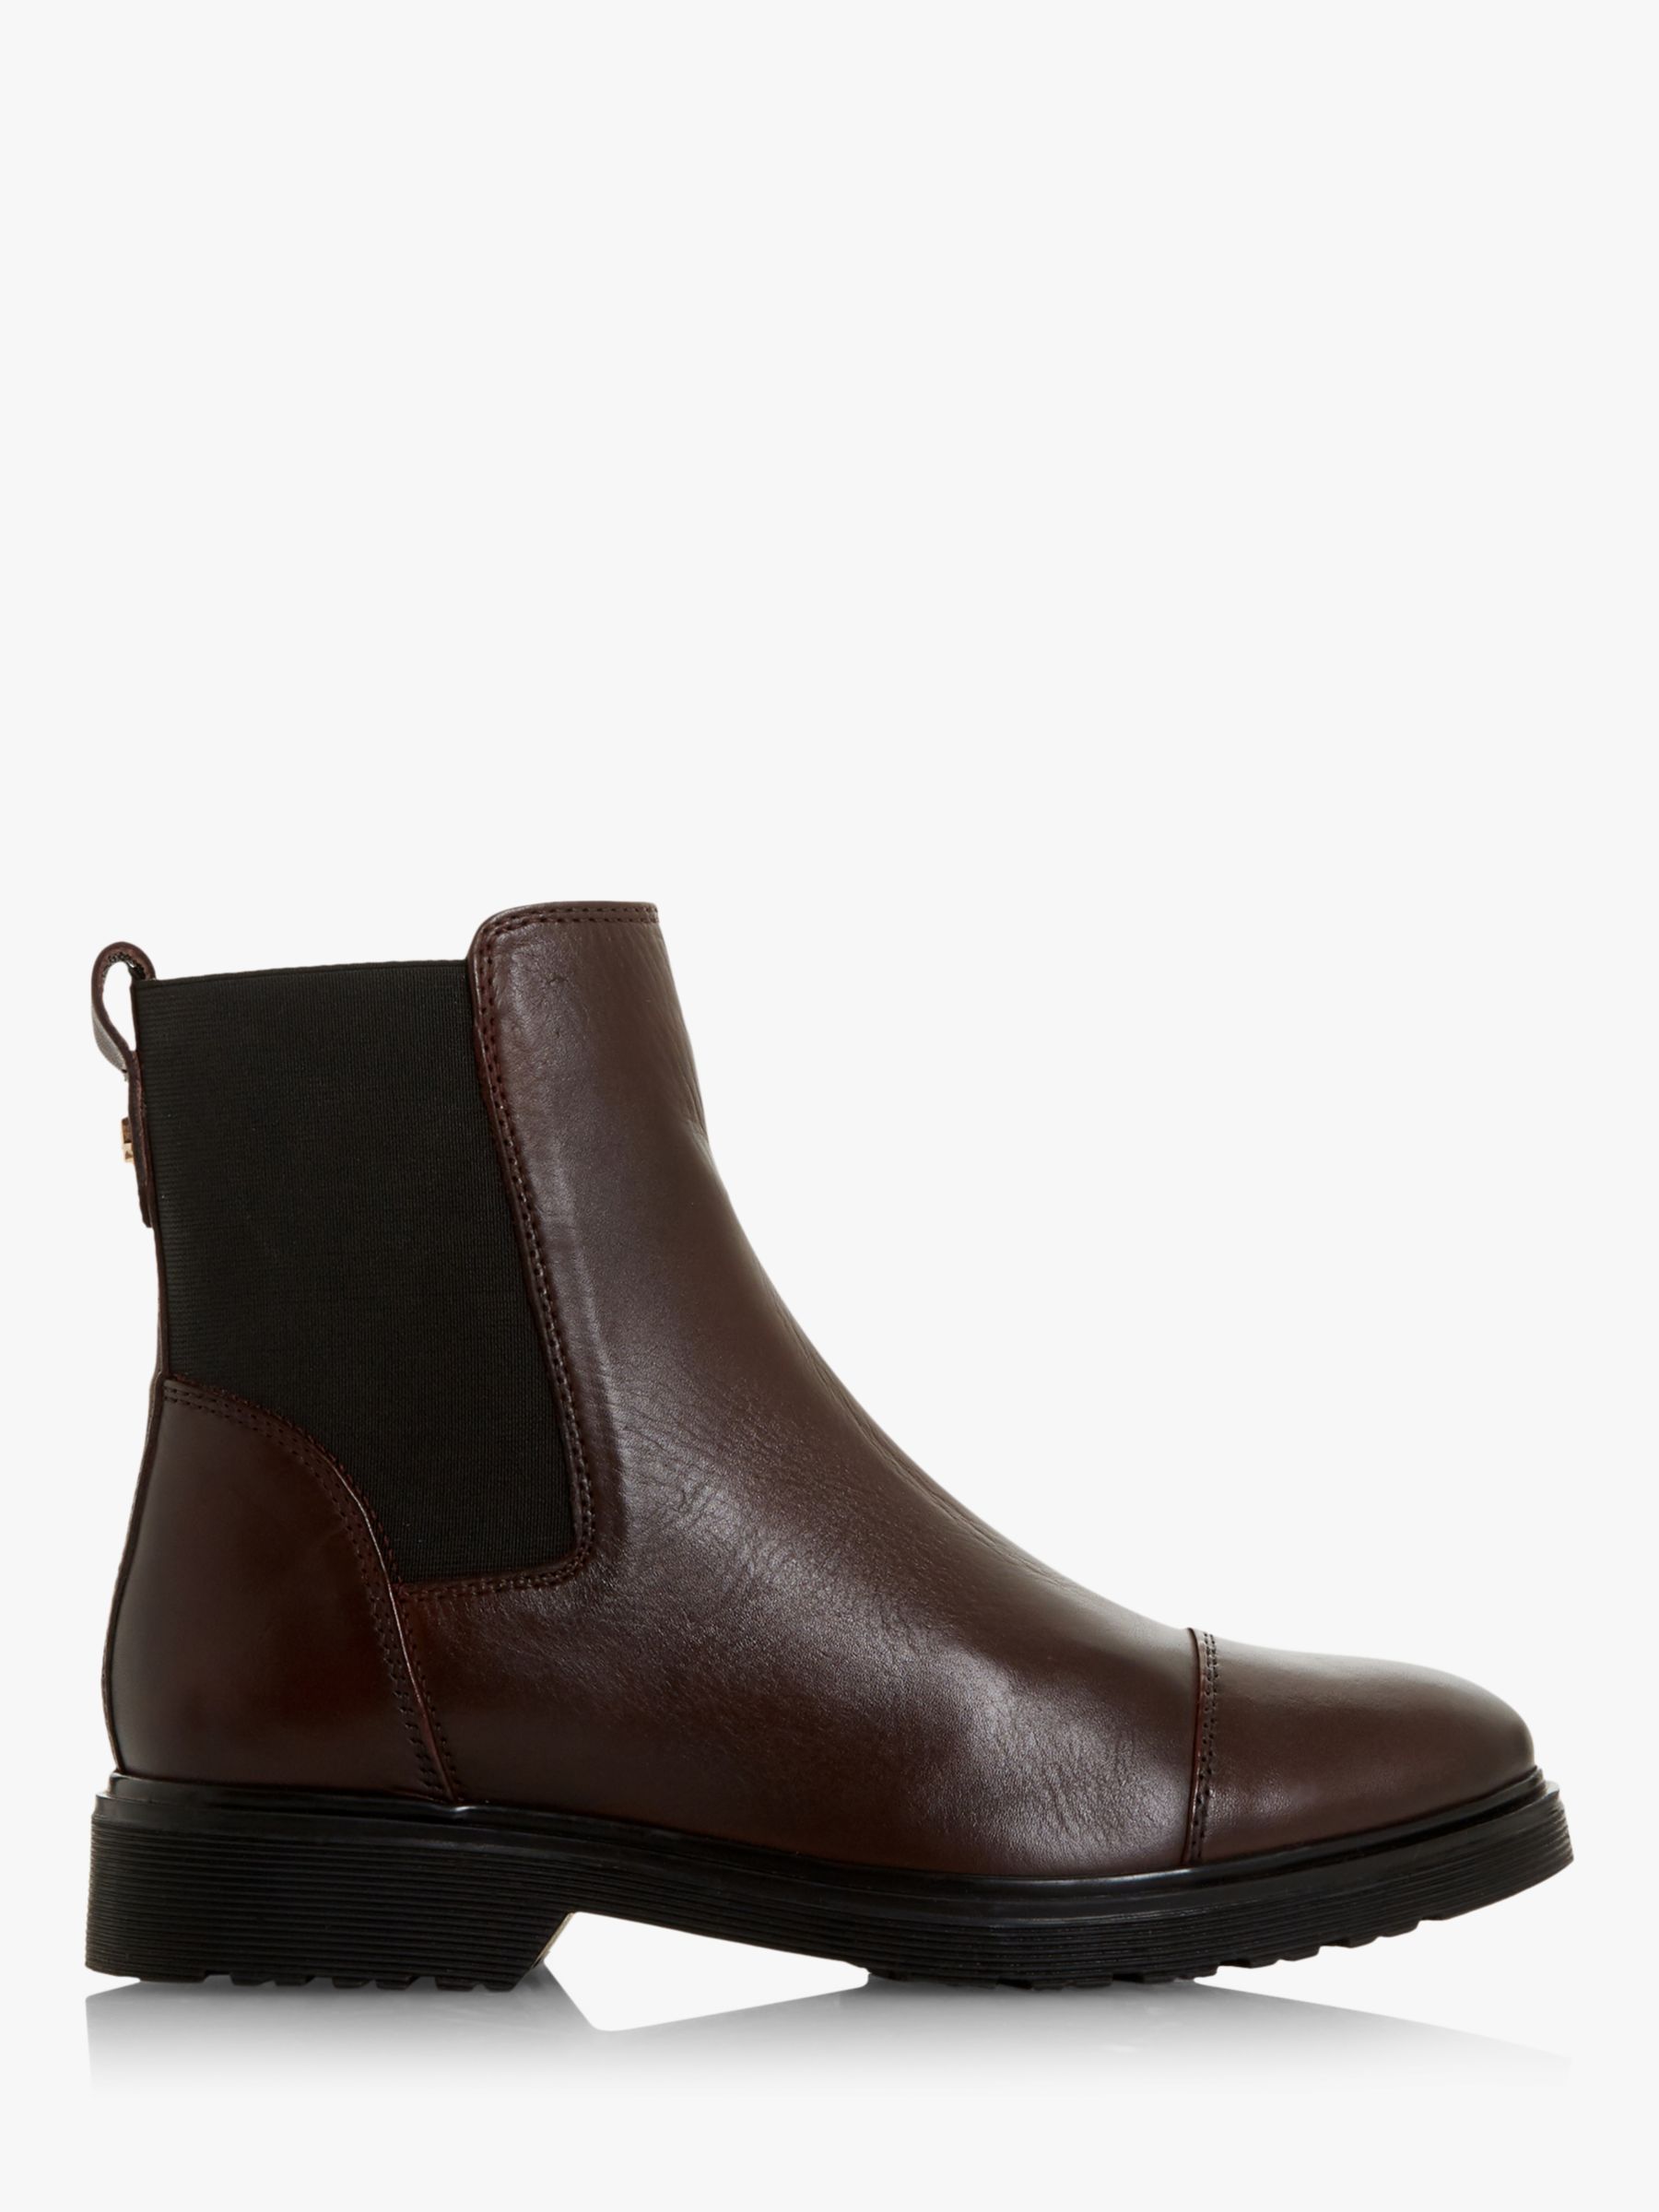 Dune Paysan Leather Cleated Chelsea Boots, Burgundy